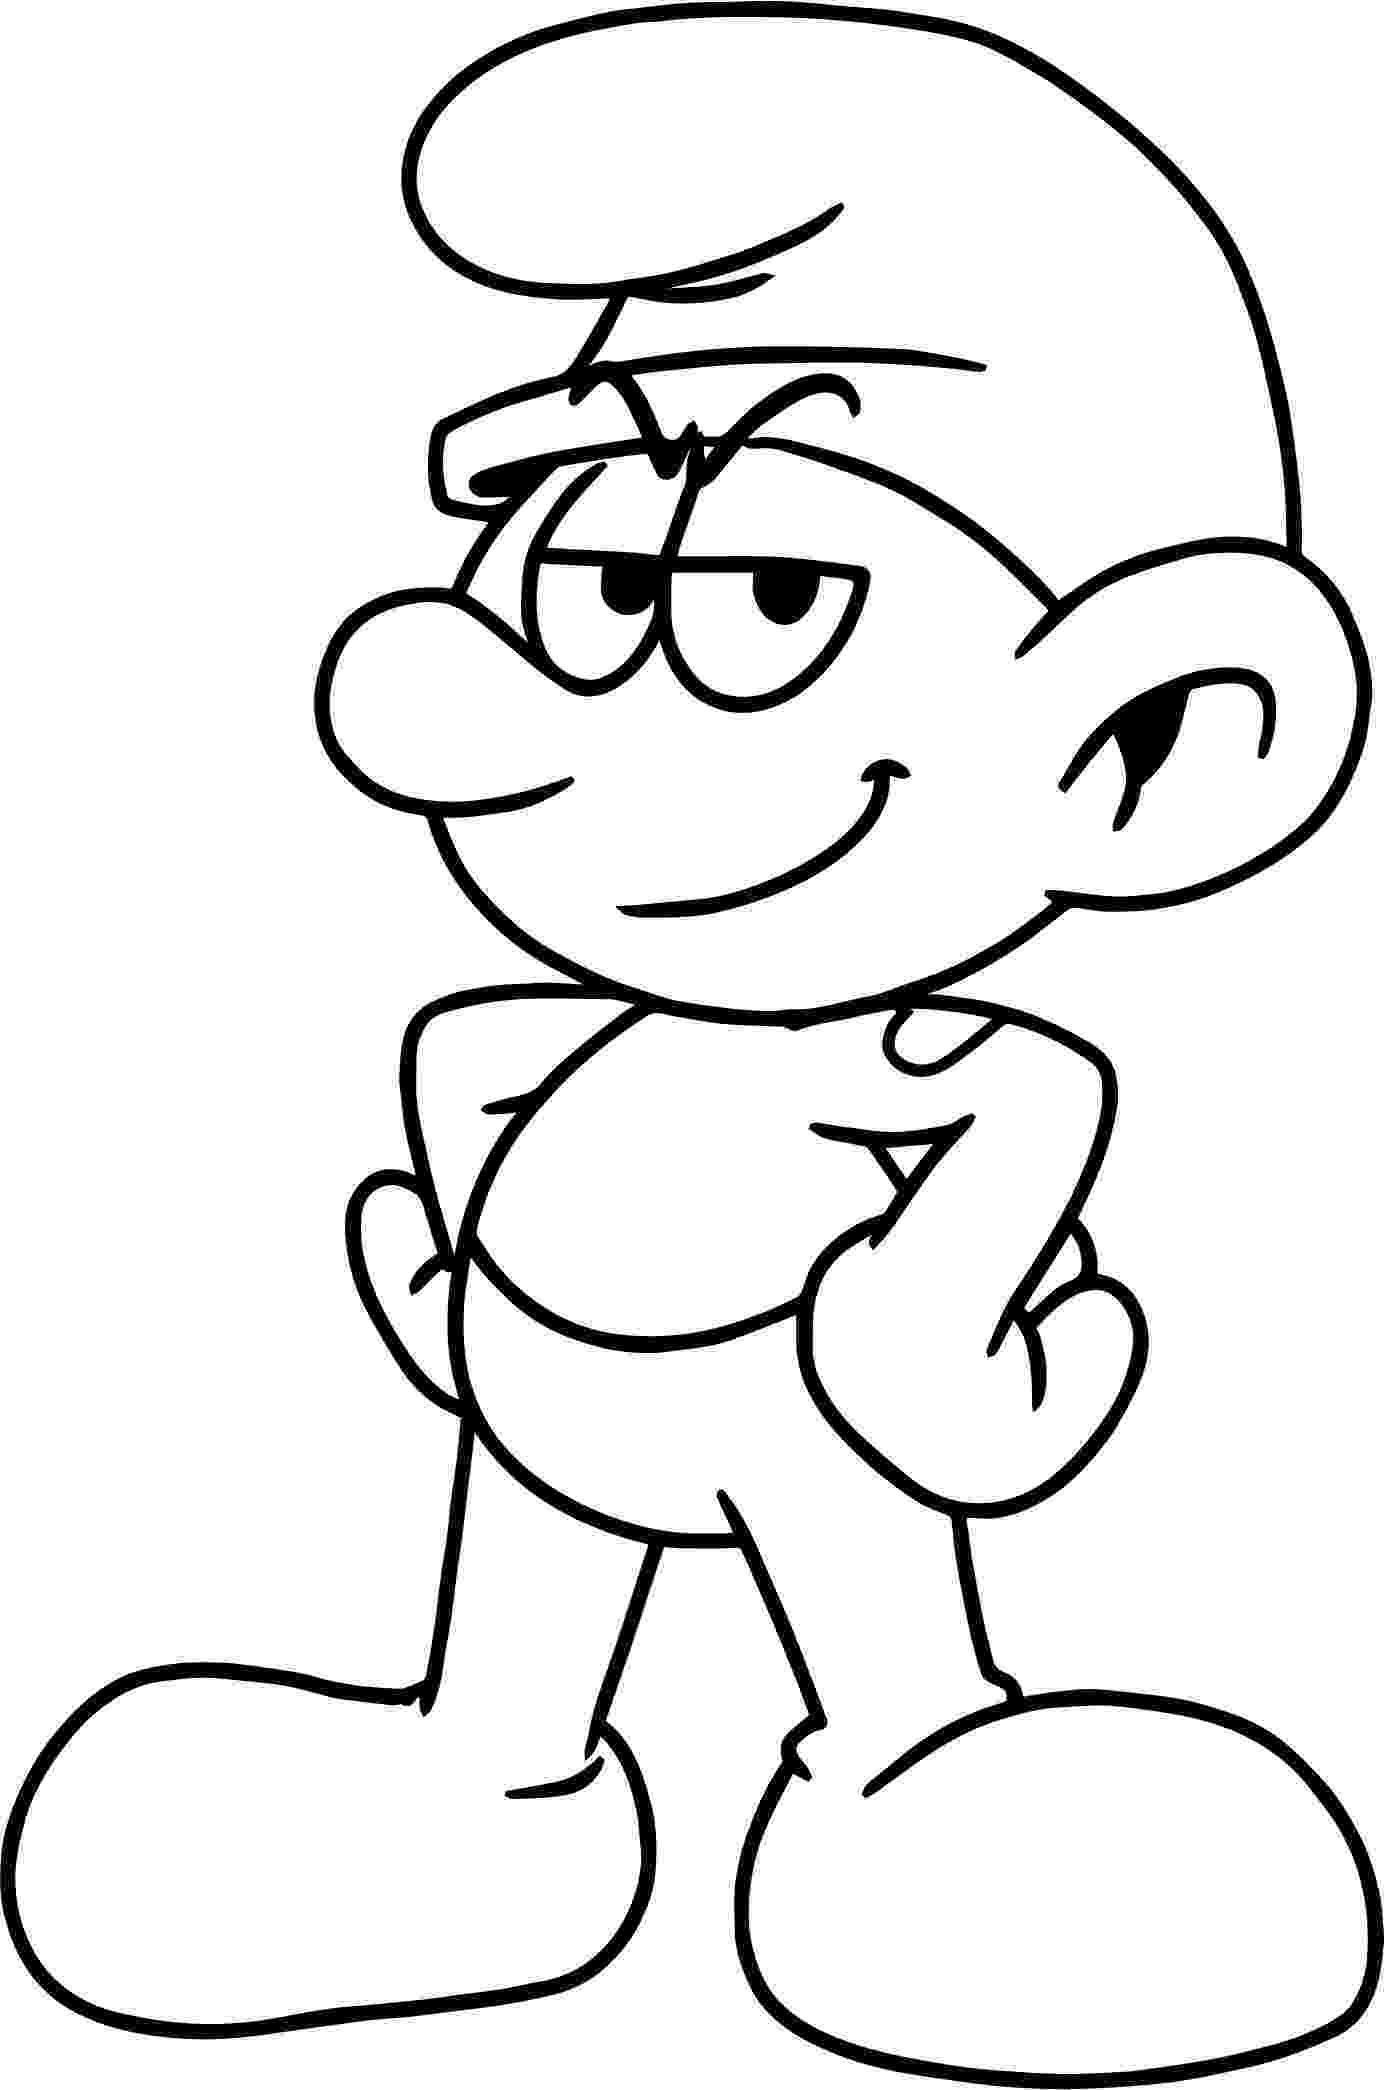 smurf pictures doctor rush smurf coloring page wecoloringpagecom pictures smurf 